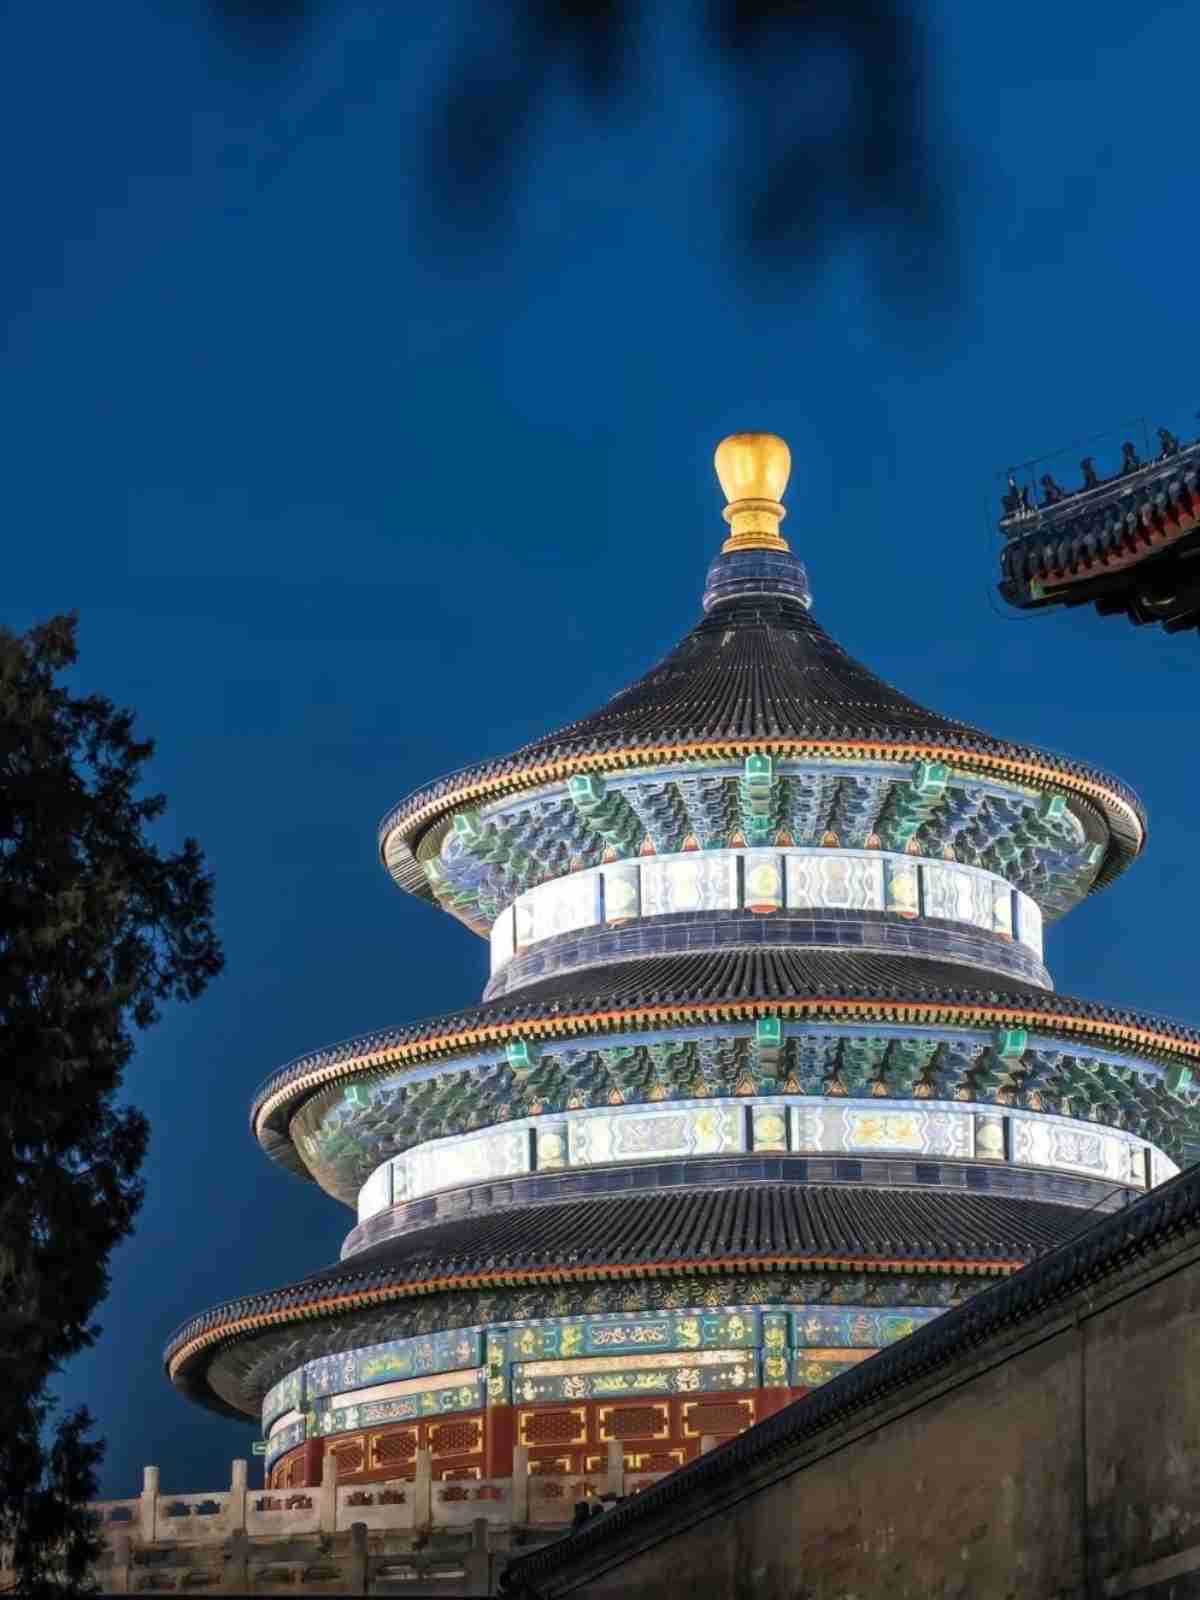 The Temple of Heaven night view